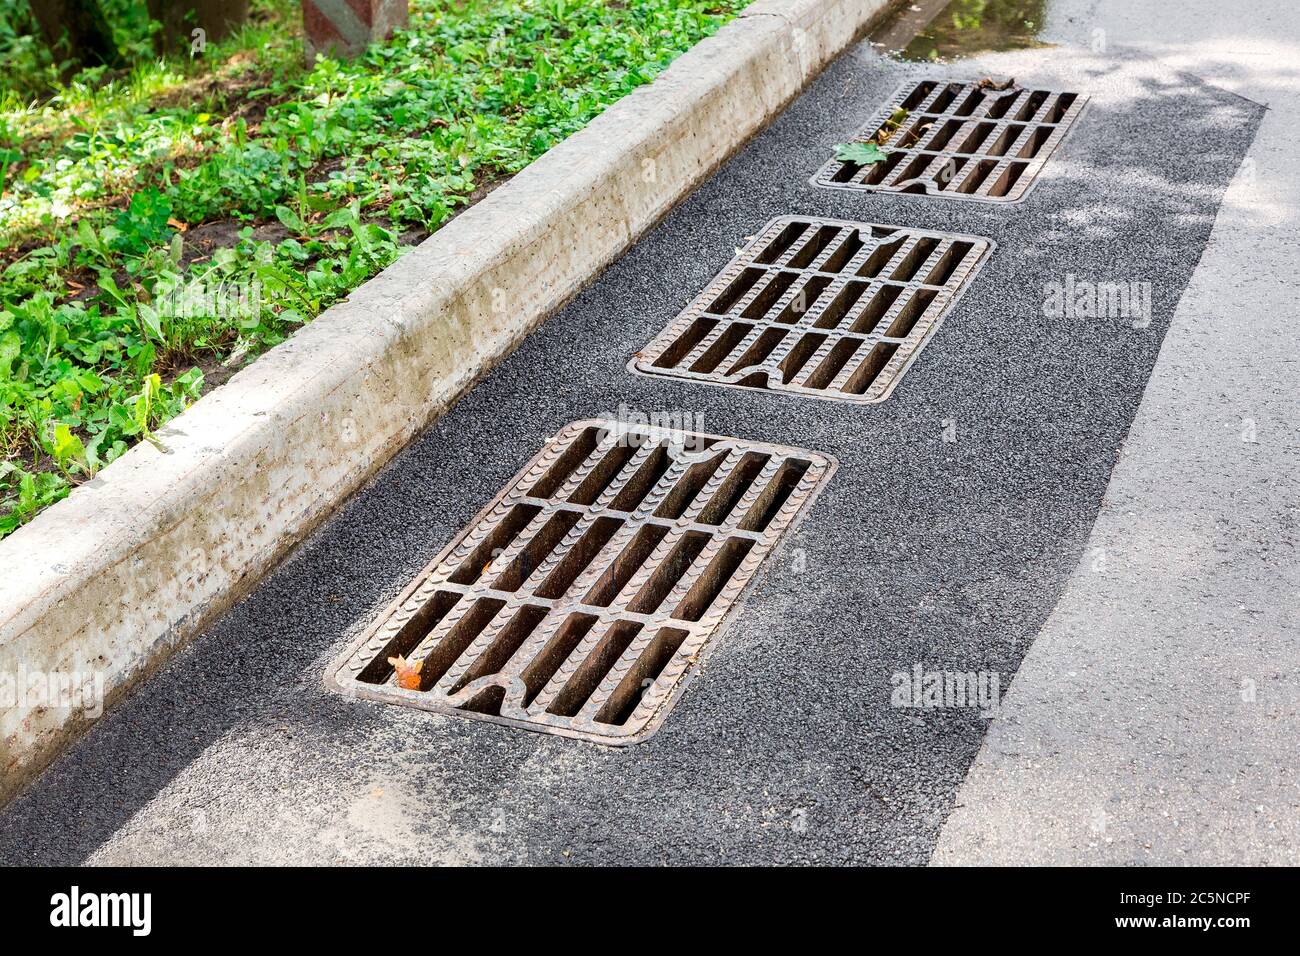 hatch storm system with a rusty grate in the asphalt road surface with a stone curb. Stock Photo